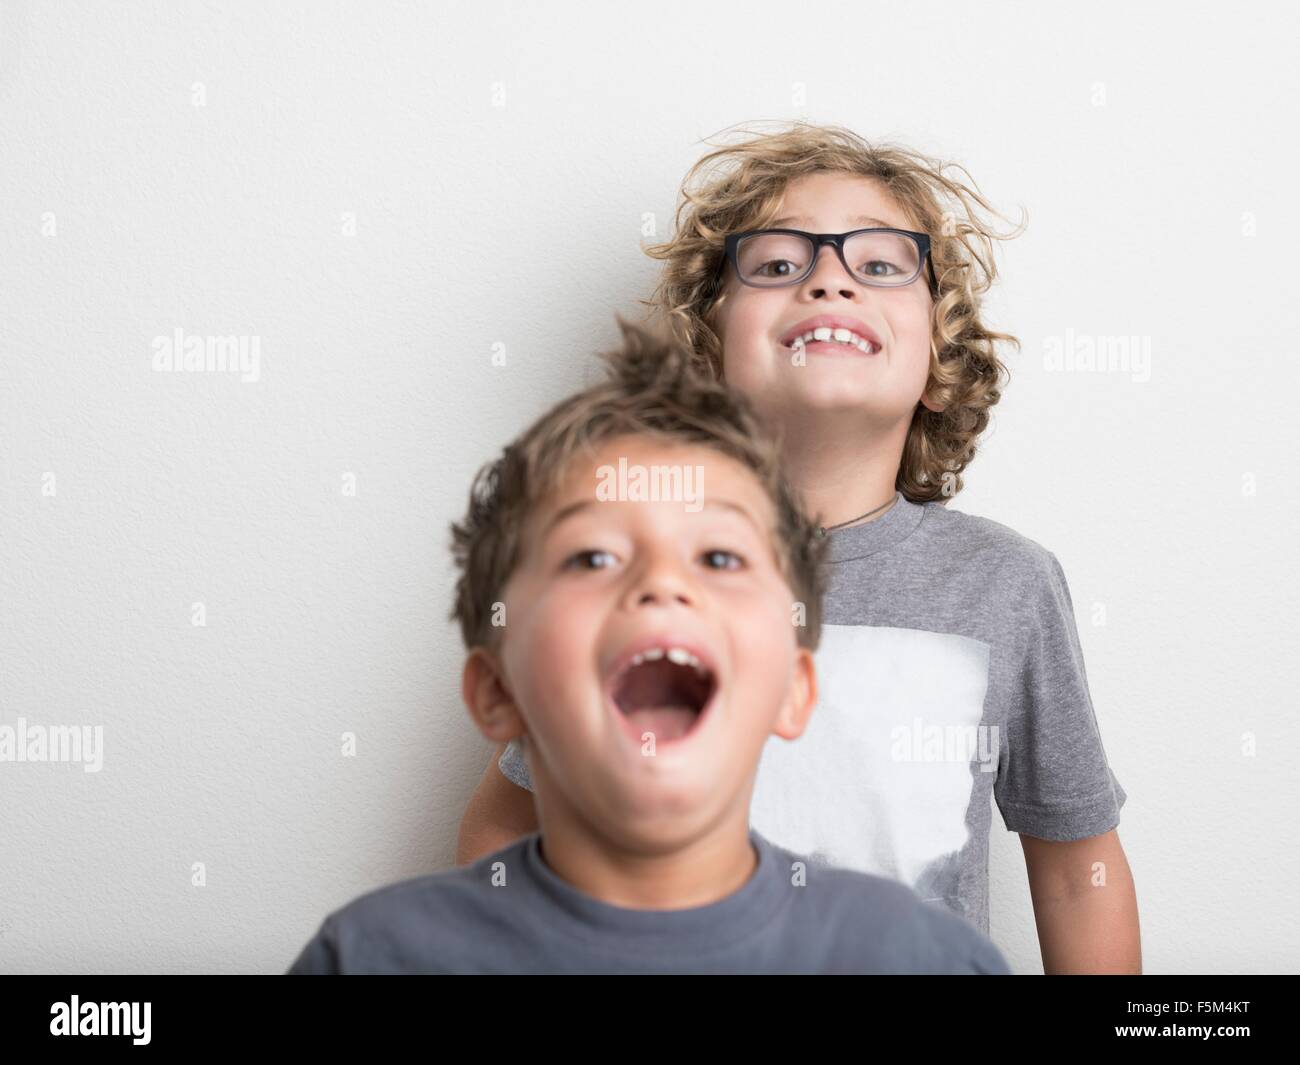 Boys making silly faces Stock Photo